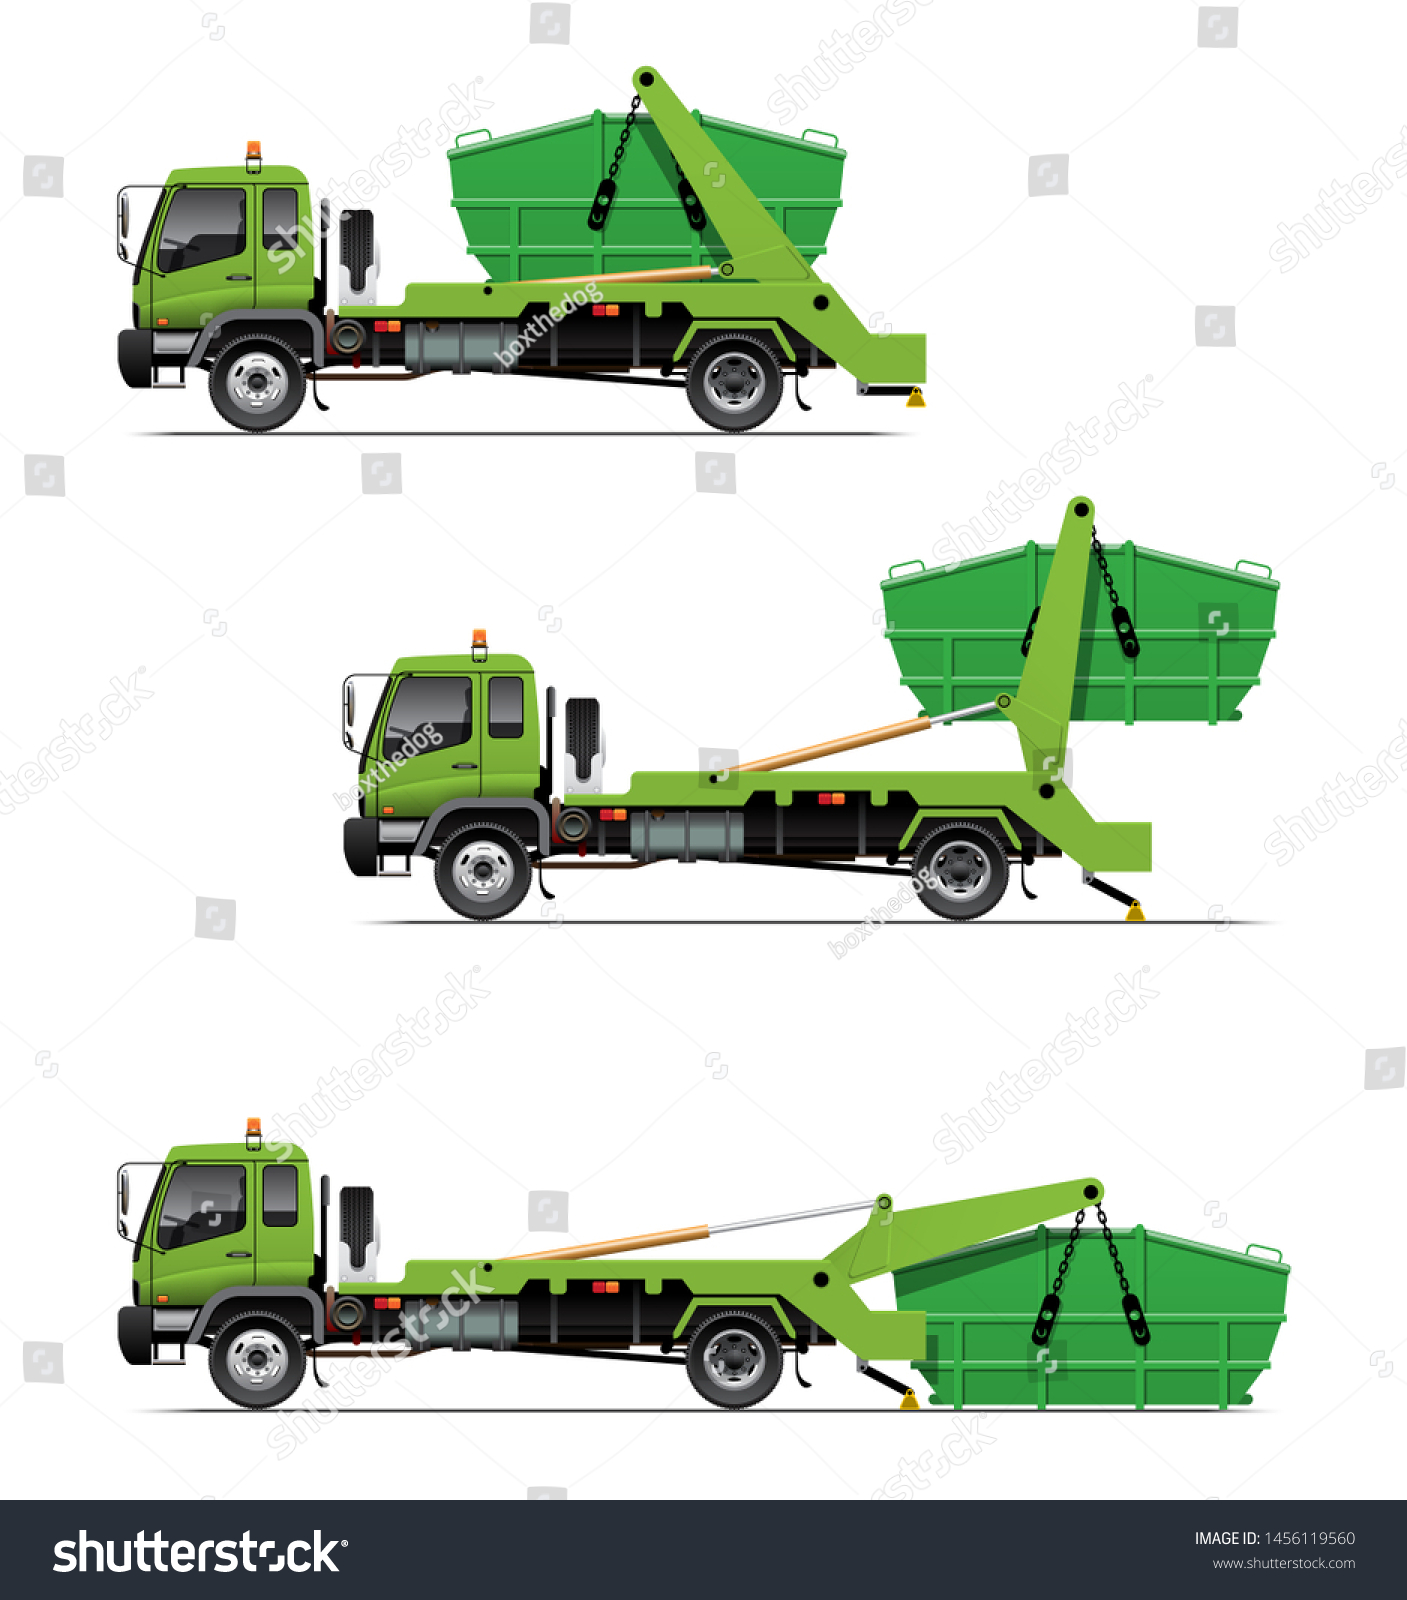 SVG of VECTOR EPS10 - lugger truck, swing arm garbage truck, waste disposal truck, skip loader, action when pick up a container, isolated on white background. svg